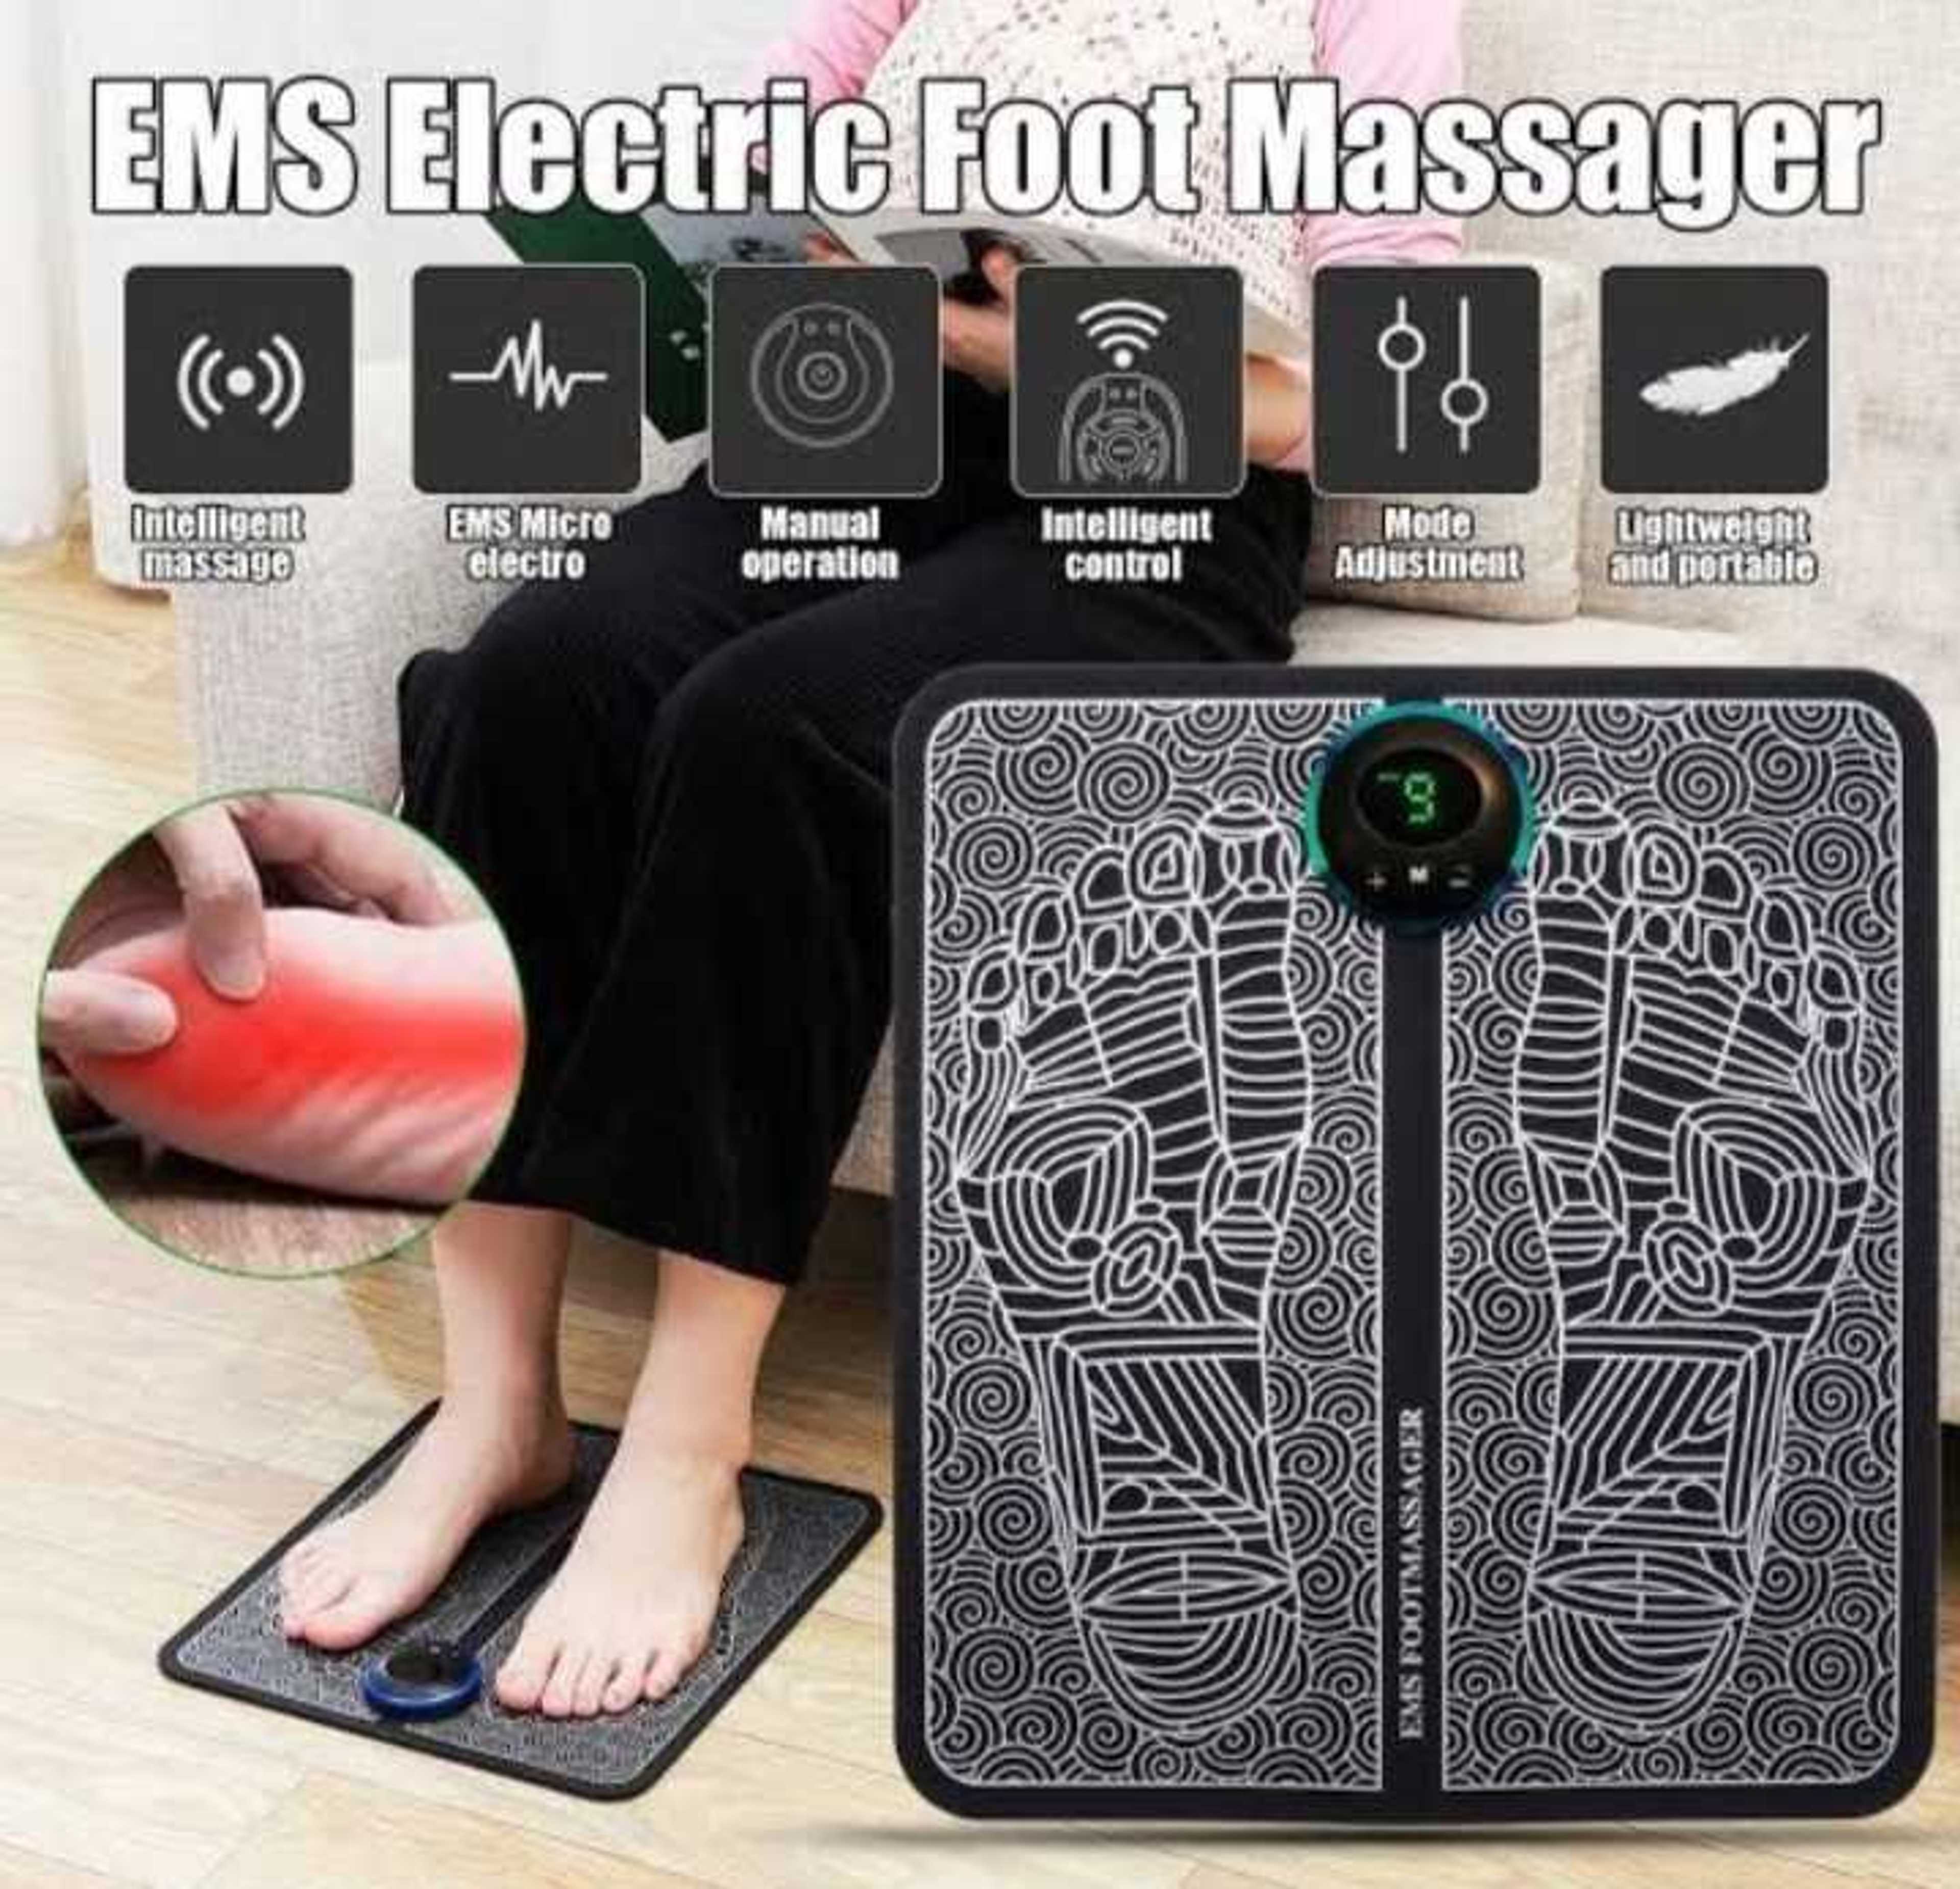 EMS Electric Foot Massage Machine - Best Quality and Portable Foldable Mat